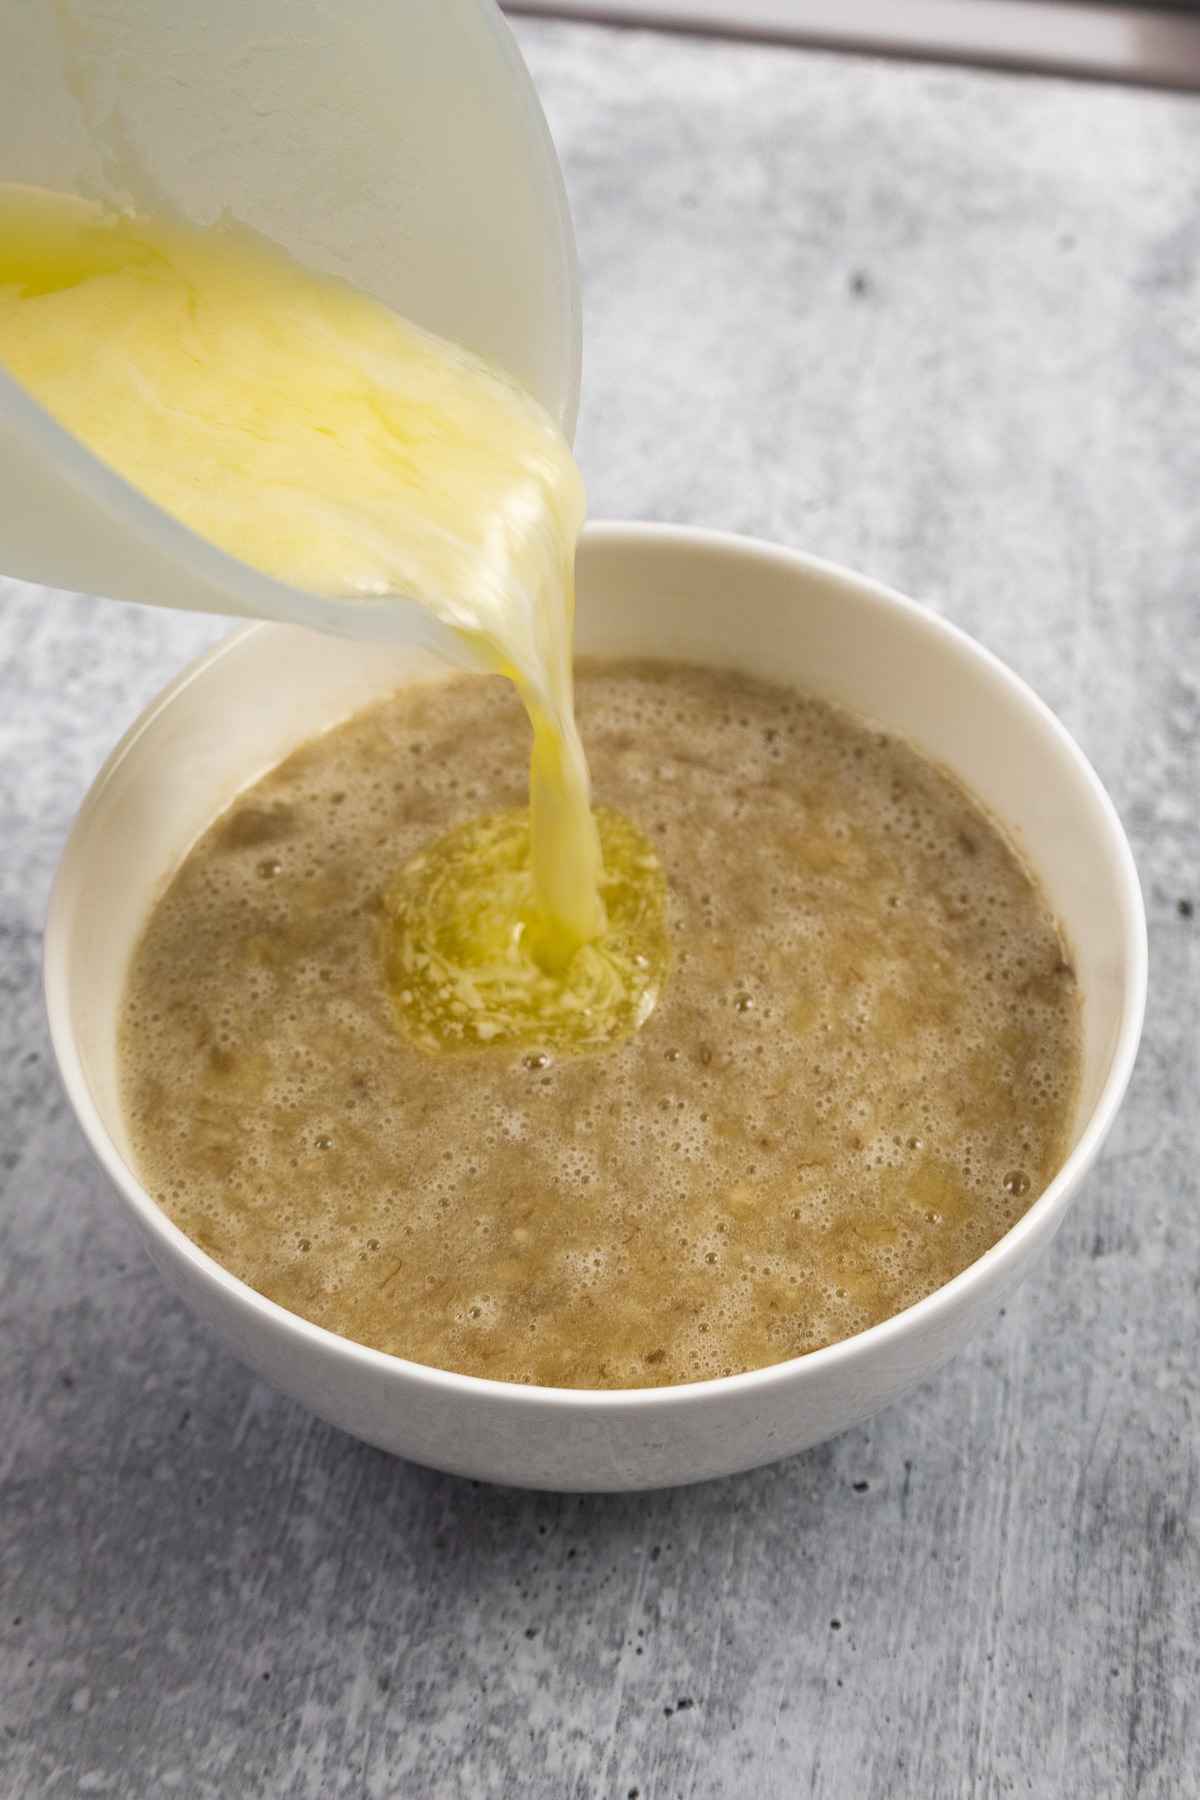 Pouring melted butter into mashed banana mixture